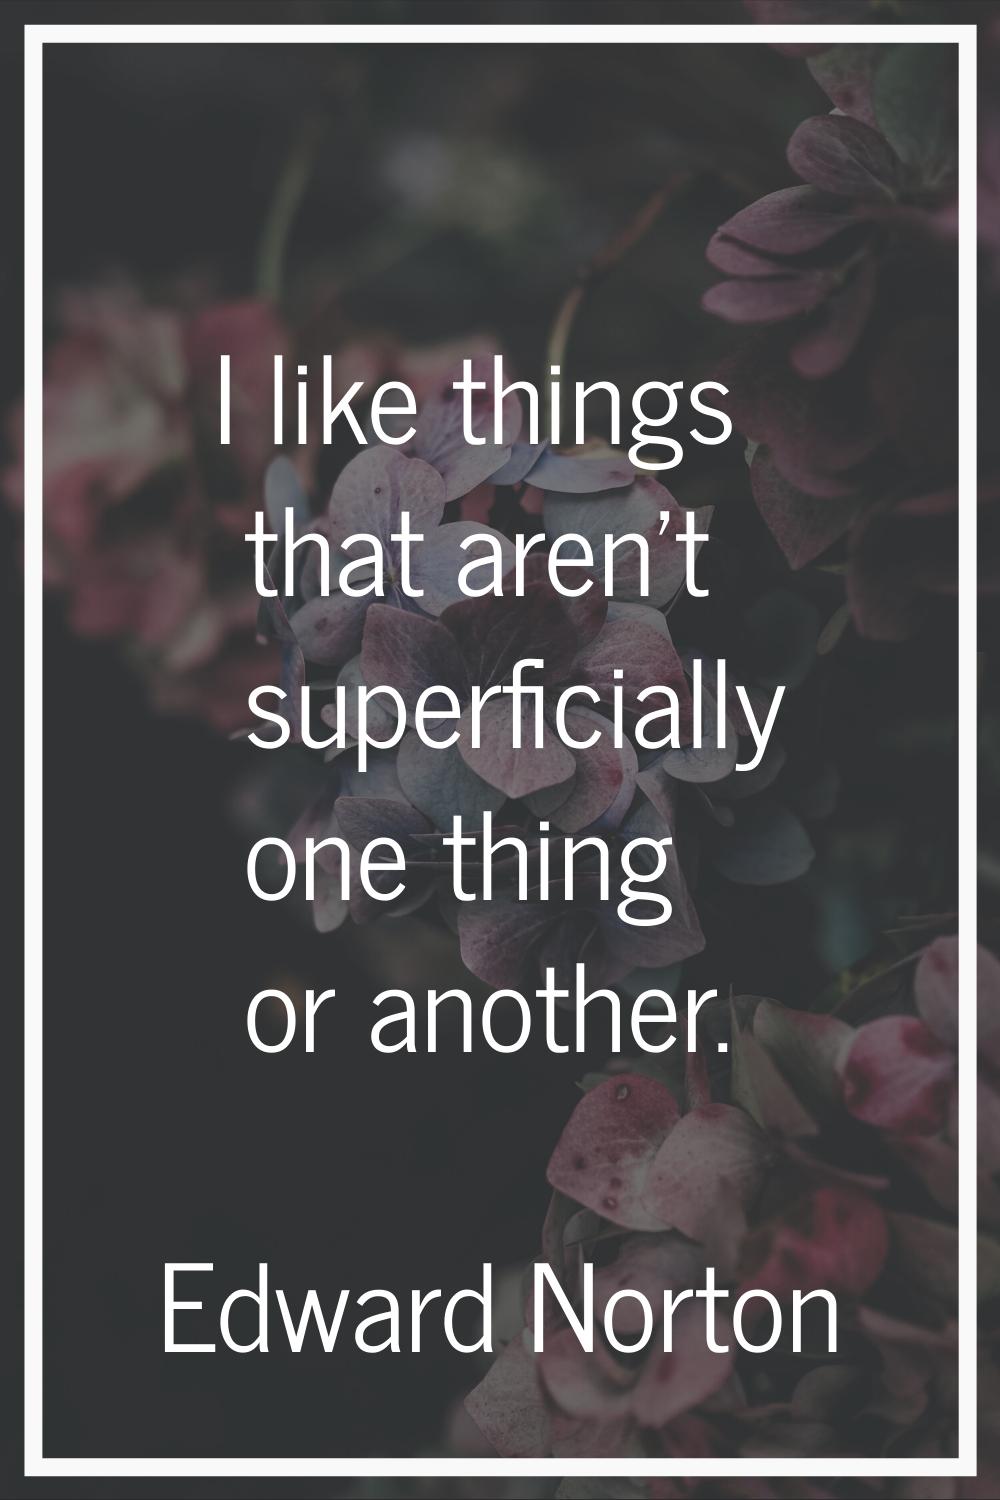 I like things that aren't superficially one thing or another.